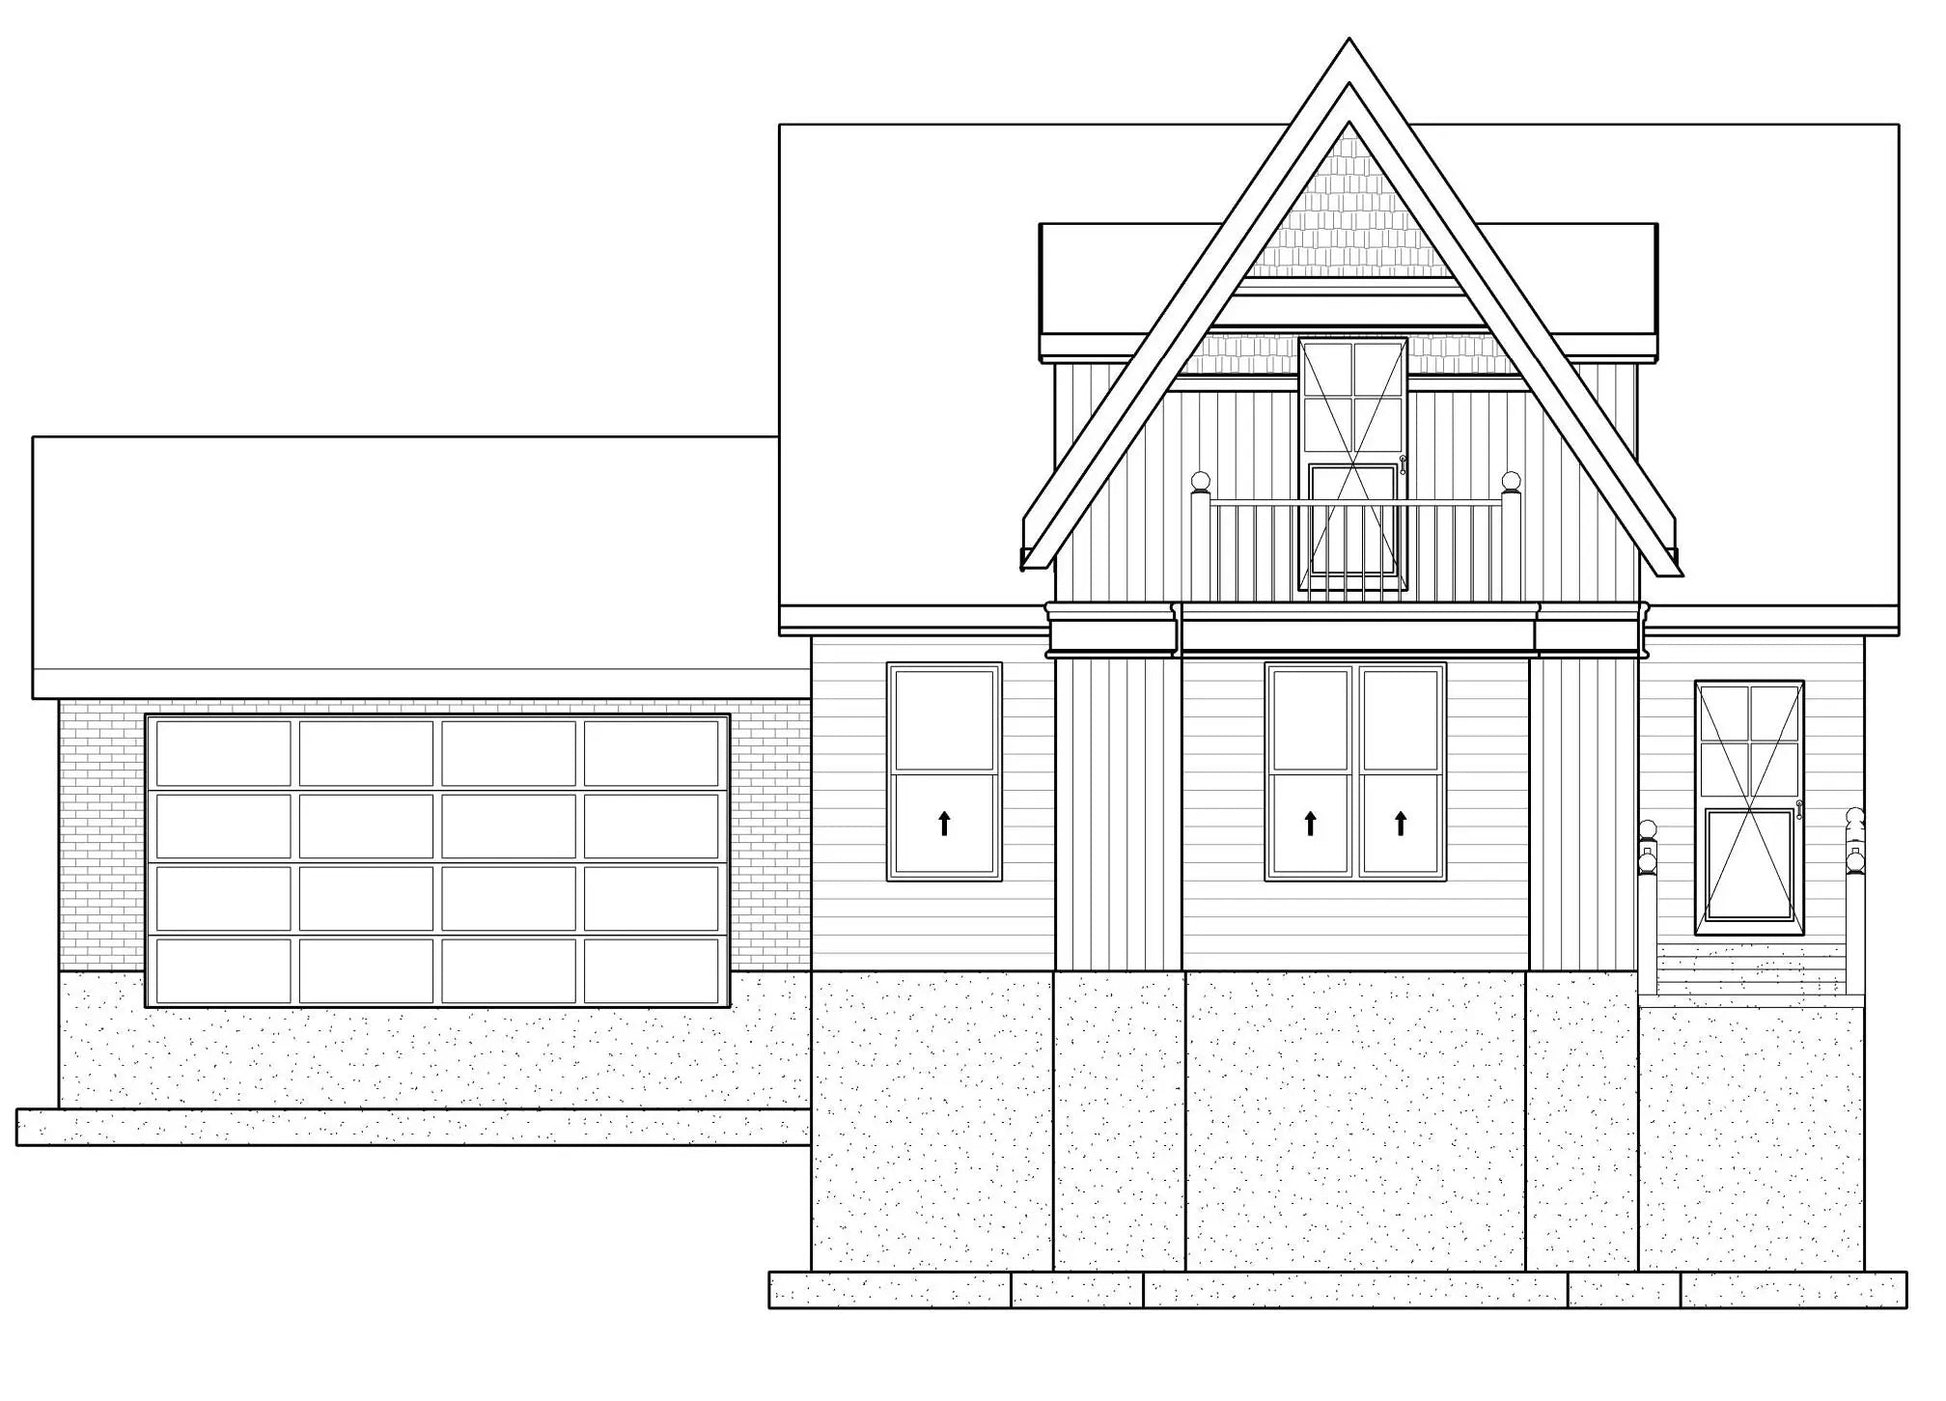 VICTORIAN House Plan Elevation by Authentic Homes in Utah